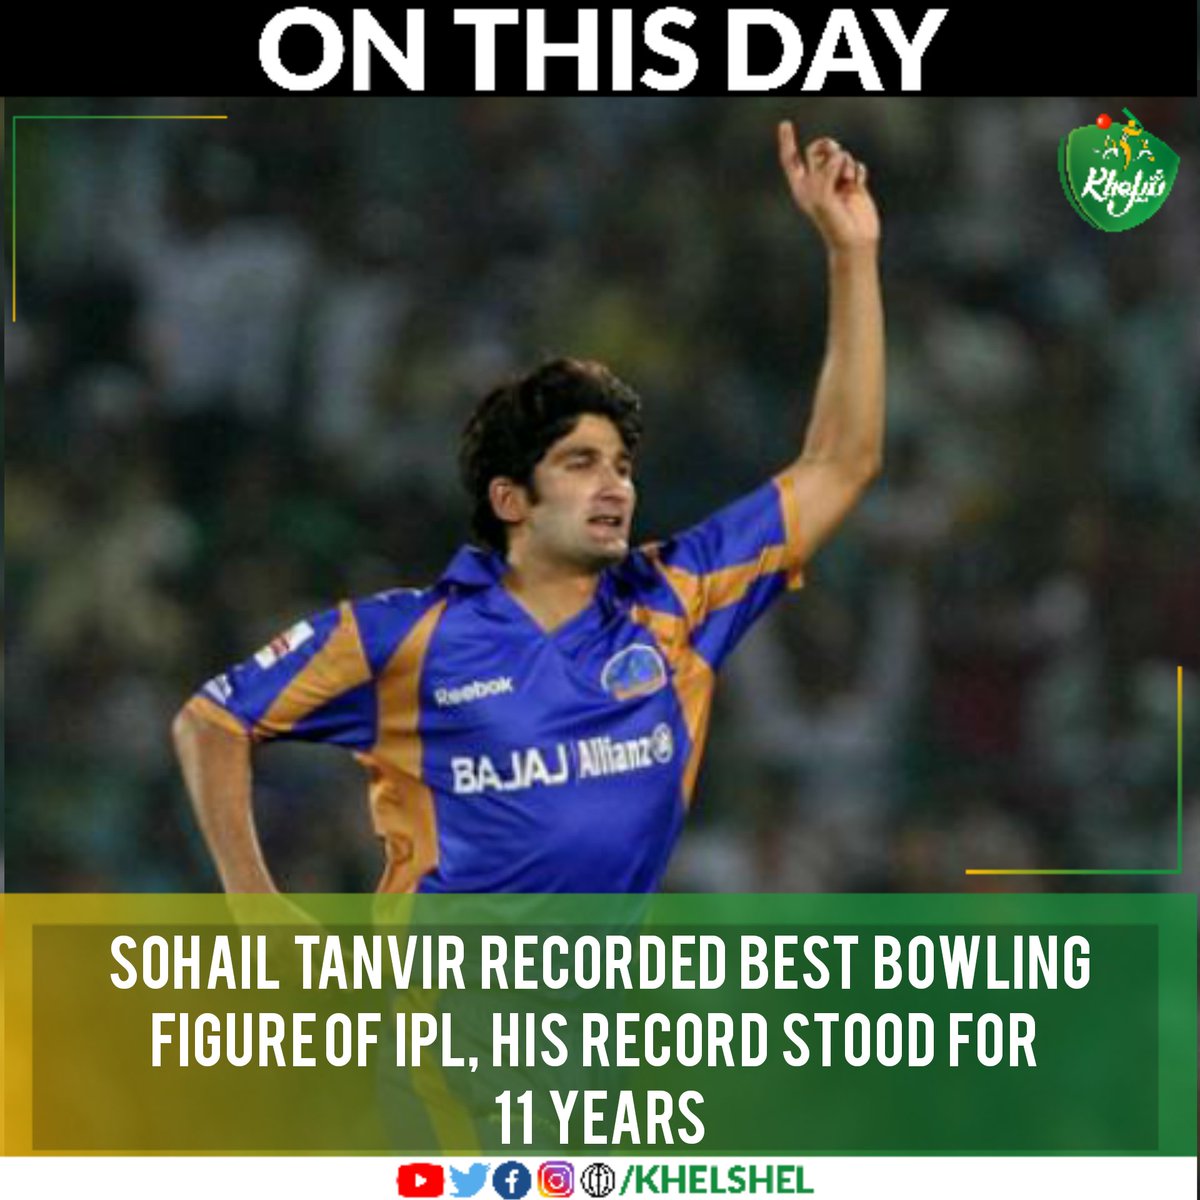 #OnThisDay in 2008, @sohailmalik614 became first bowler to record 6/14 in 4 in IPL against Chennai Super Kings at Jaipur, his record stood for 11 years. #Cricket | #Pakistan | #SohailTanvir | #IPL | #RajastanRoyals